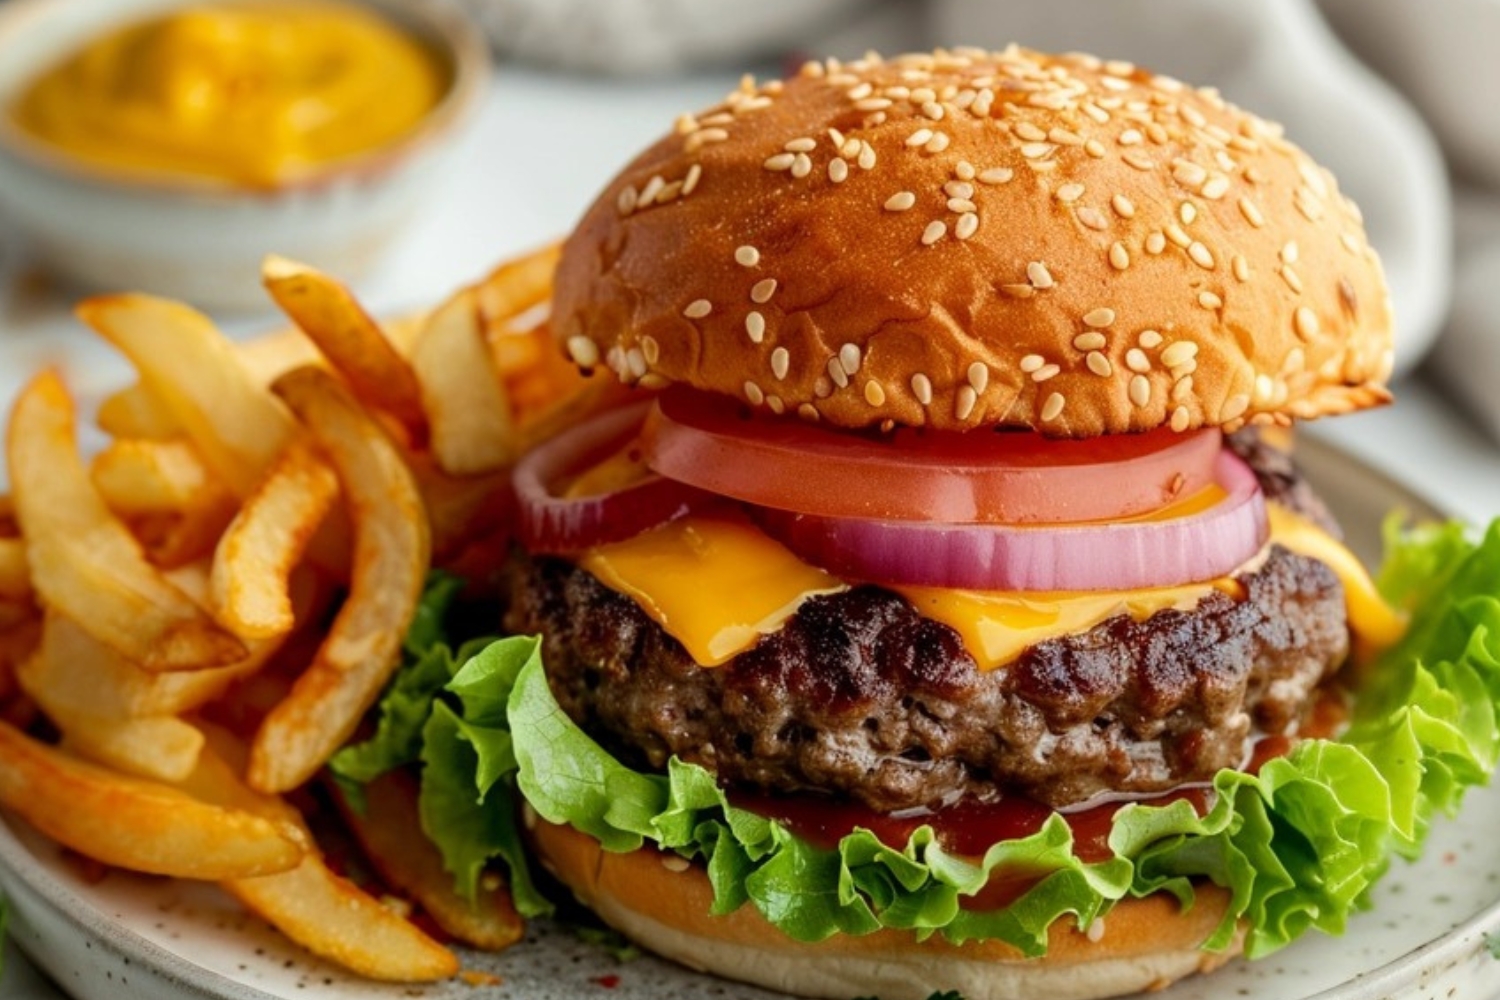 Crack burgers served with fries, with thick patty, tomatoes, onions, lettuce and cheese filling.